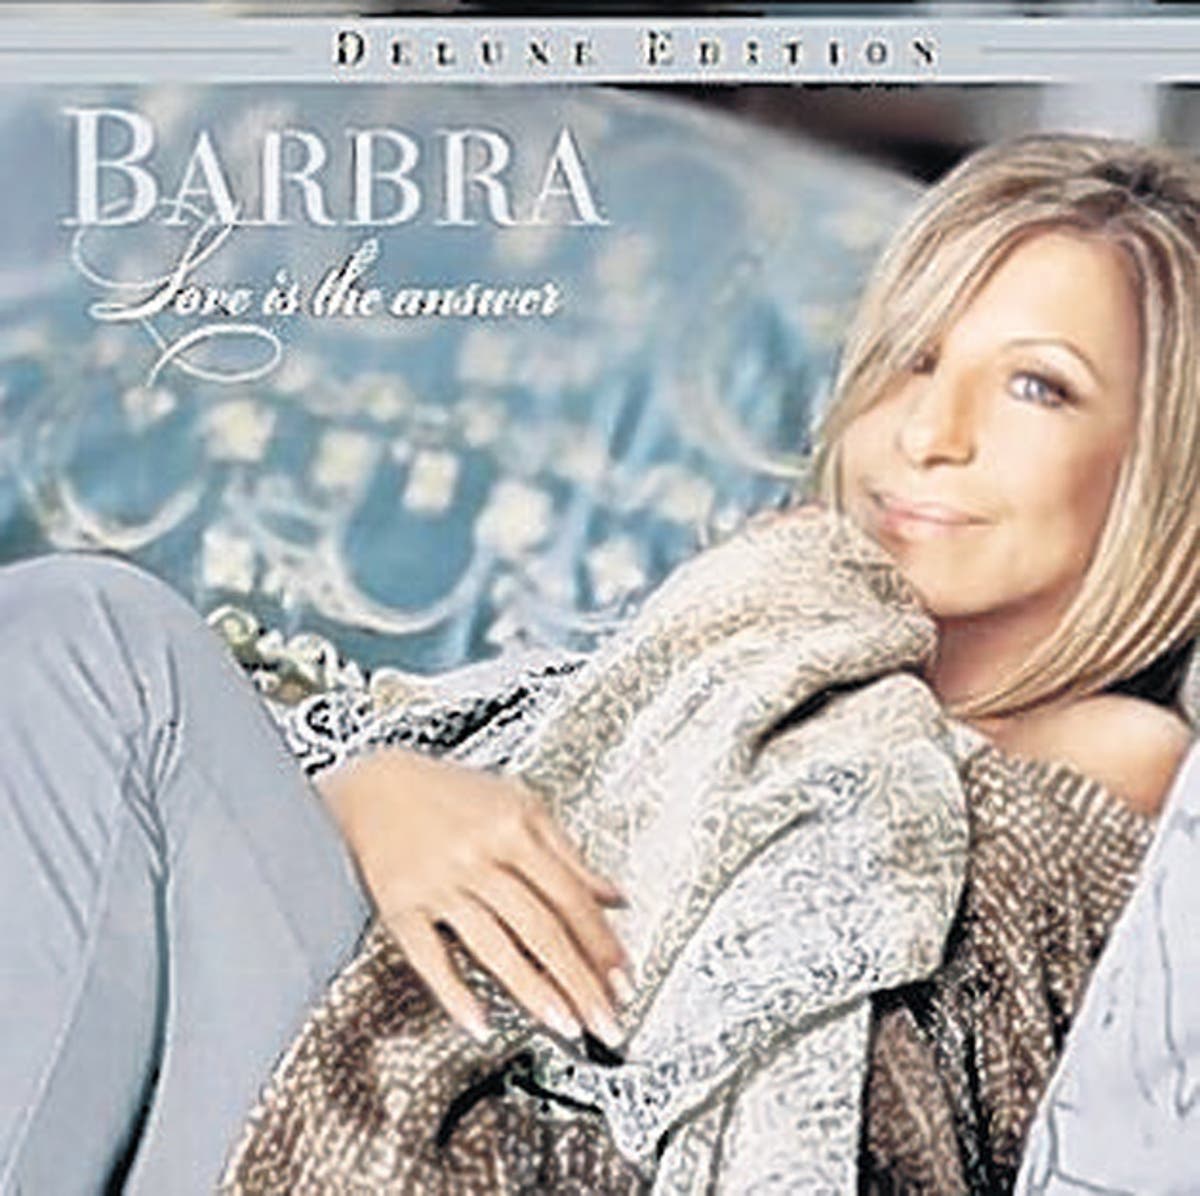 Album Barbra Streisand Love Is The Answer Columbia The